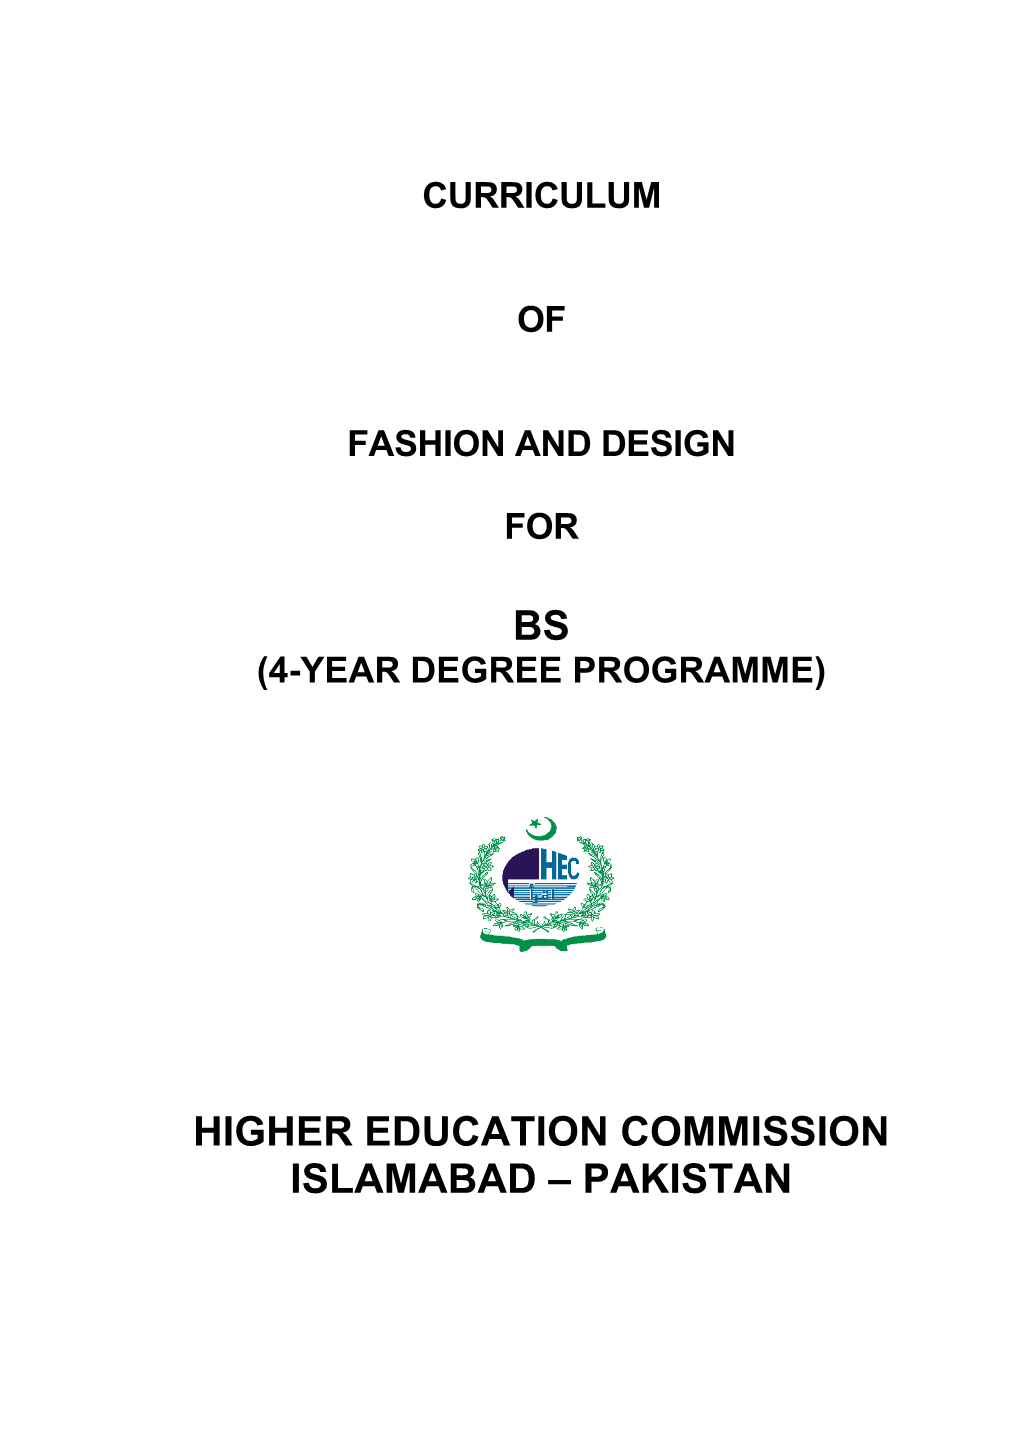 Curriculum of Fashion and Design